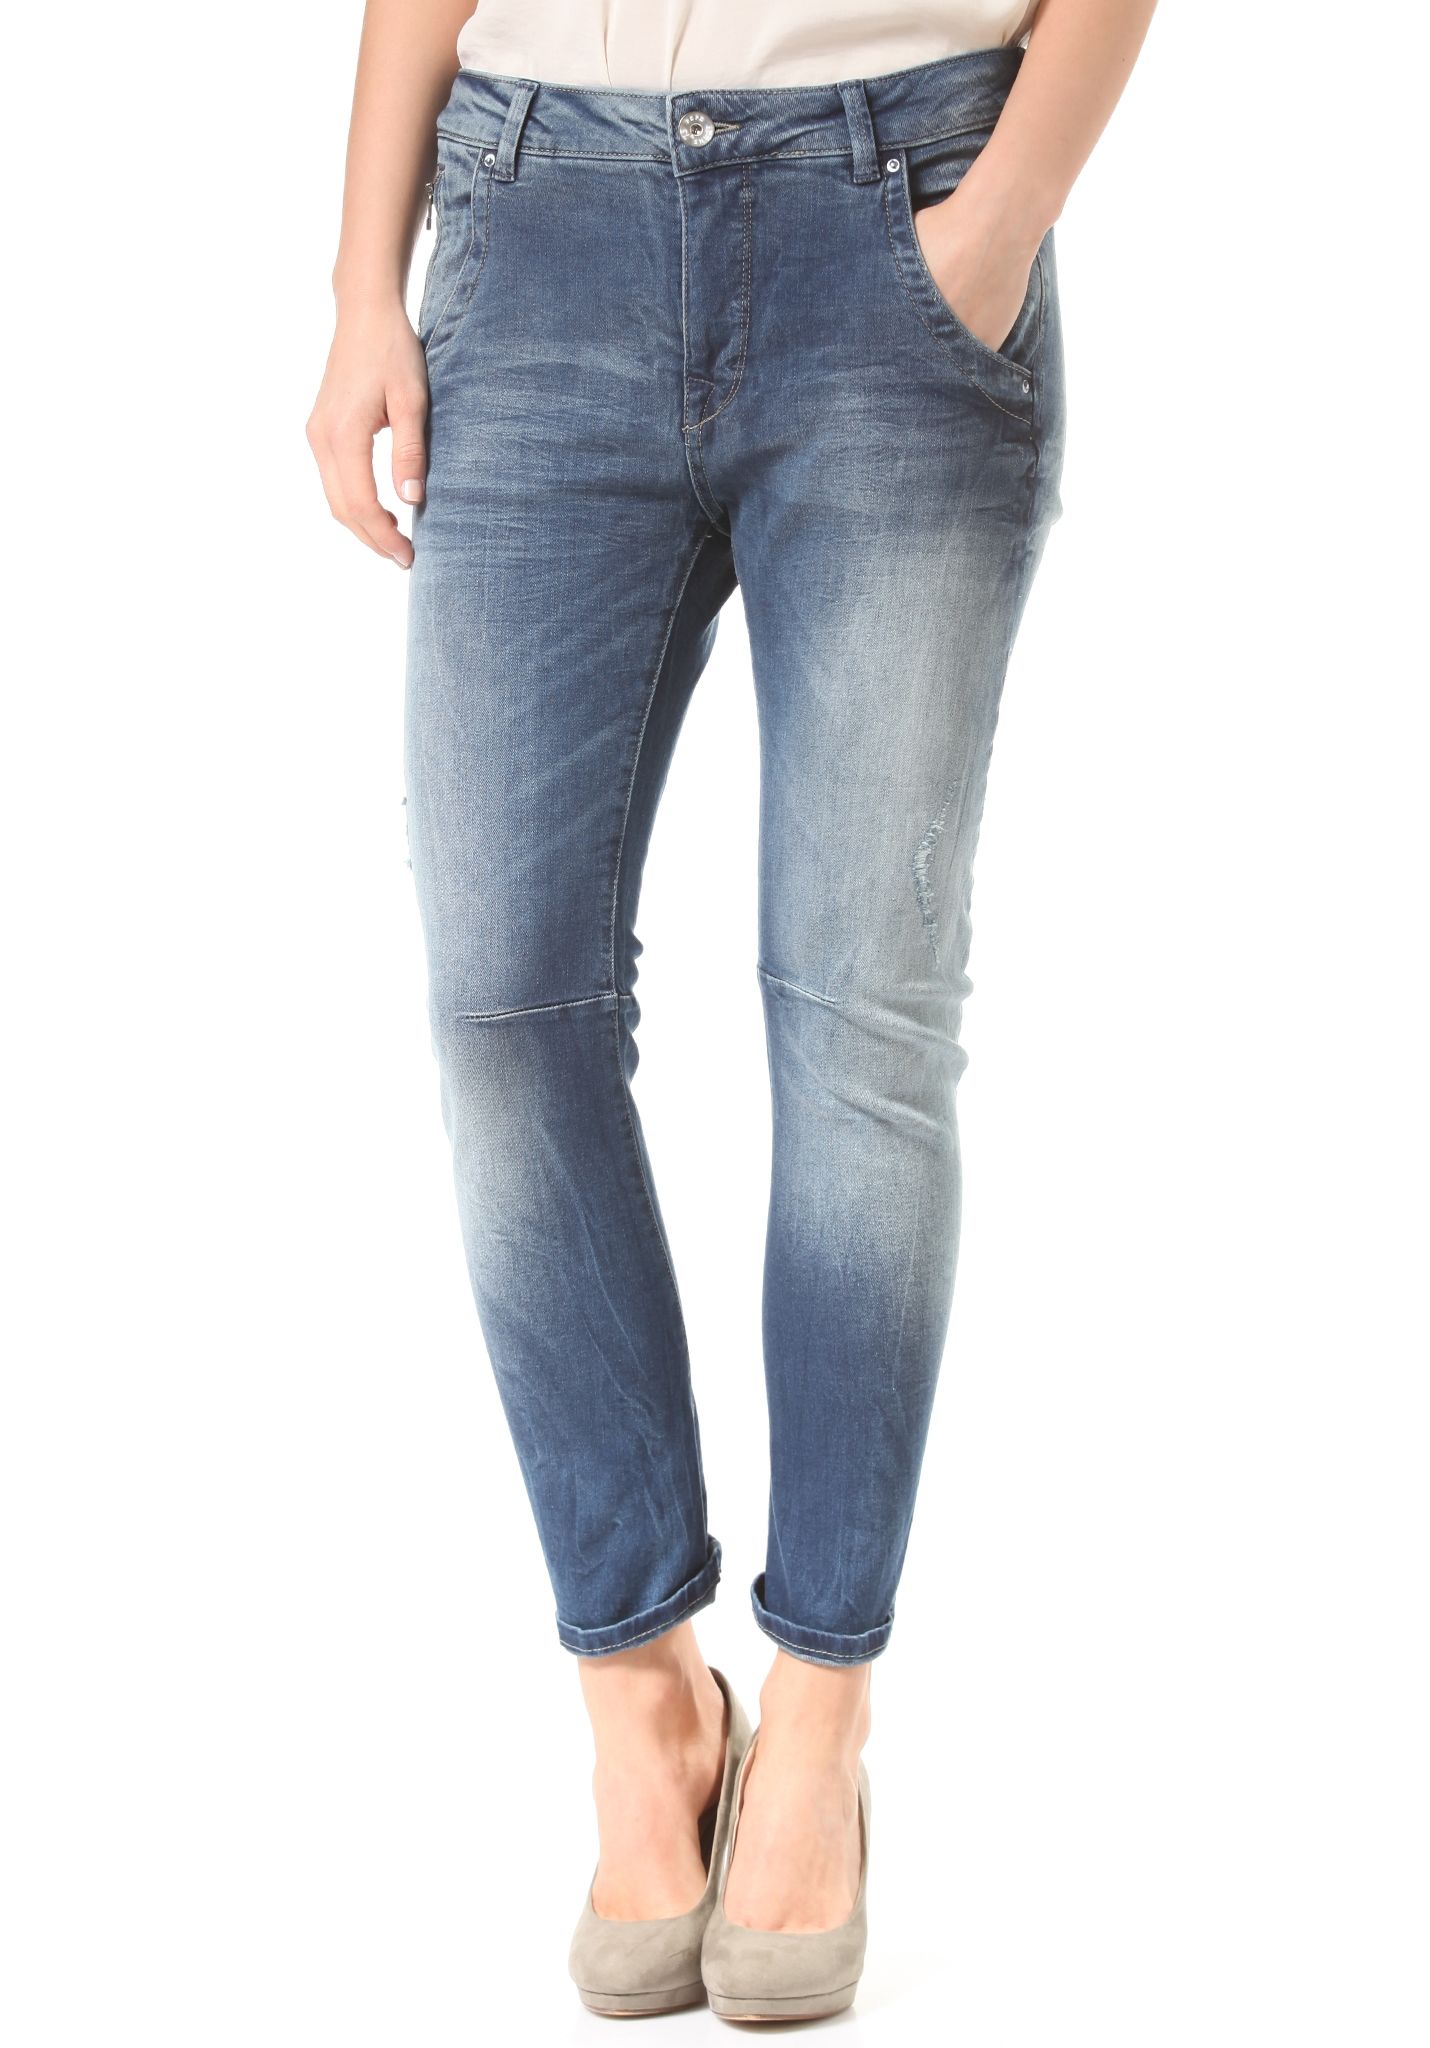 PEPE JEANS FOR WOMEN pepe jeans topsy - denim jeans for women - blue - planet sports AIXYPEB